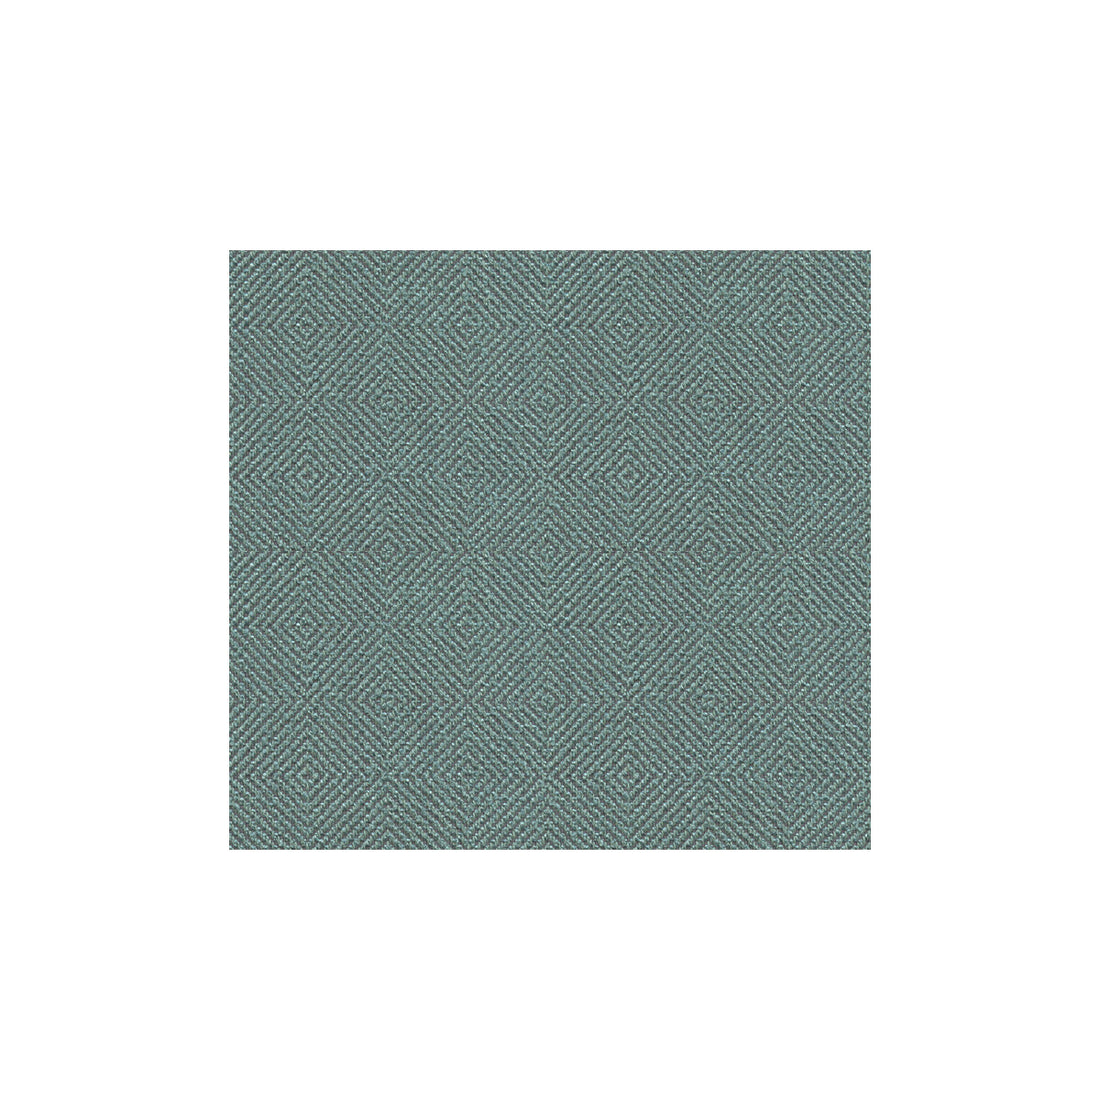 Kravet Smart fabric in 33002-5 color - pattern 33002.5.0 - by Kravet Smart in the Gis collection